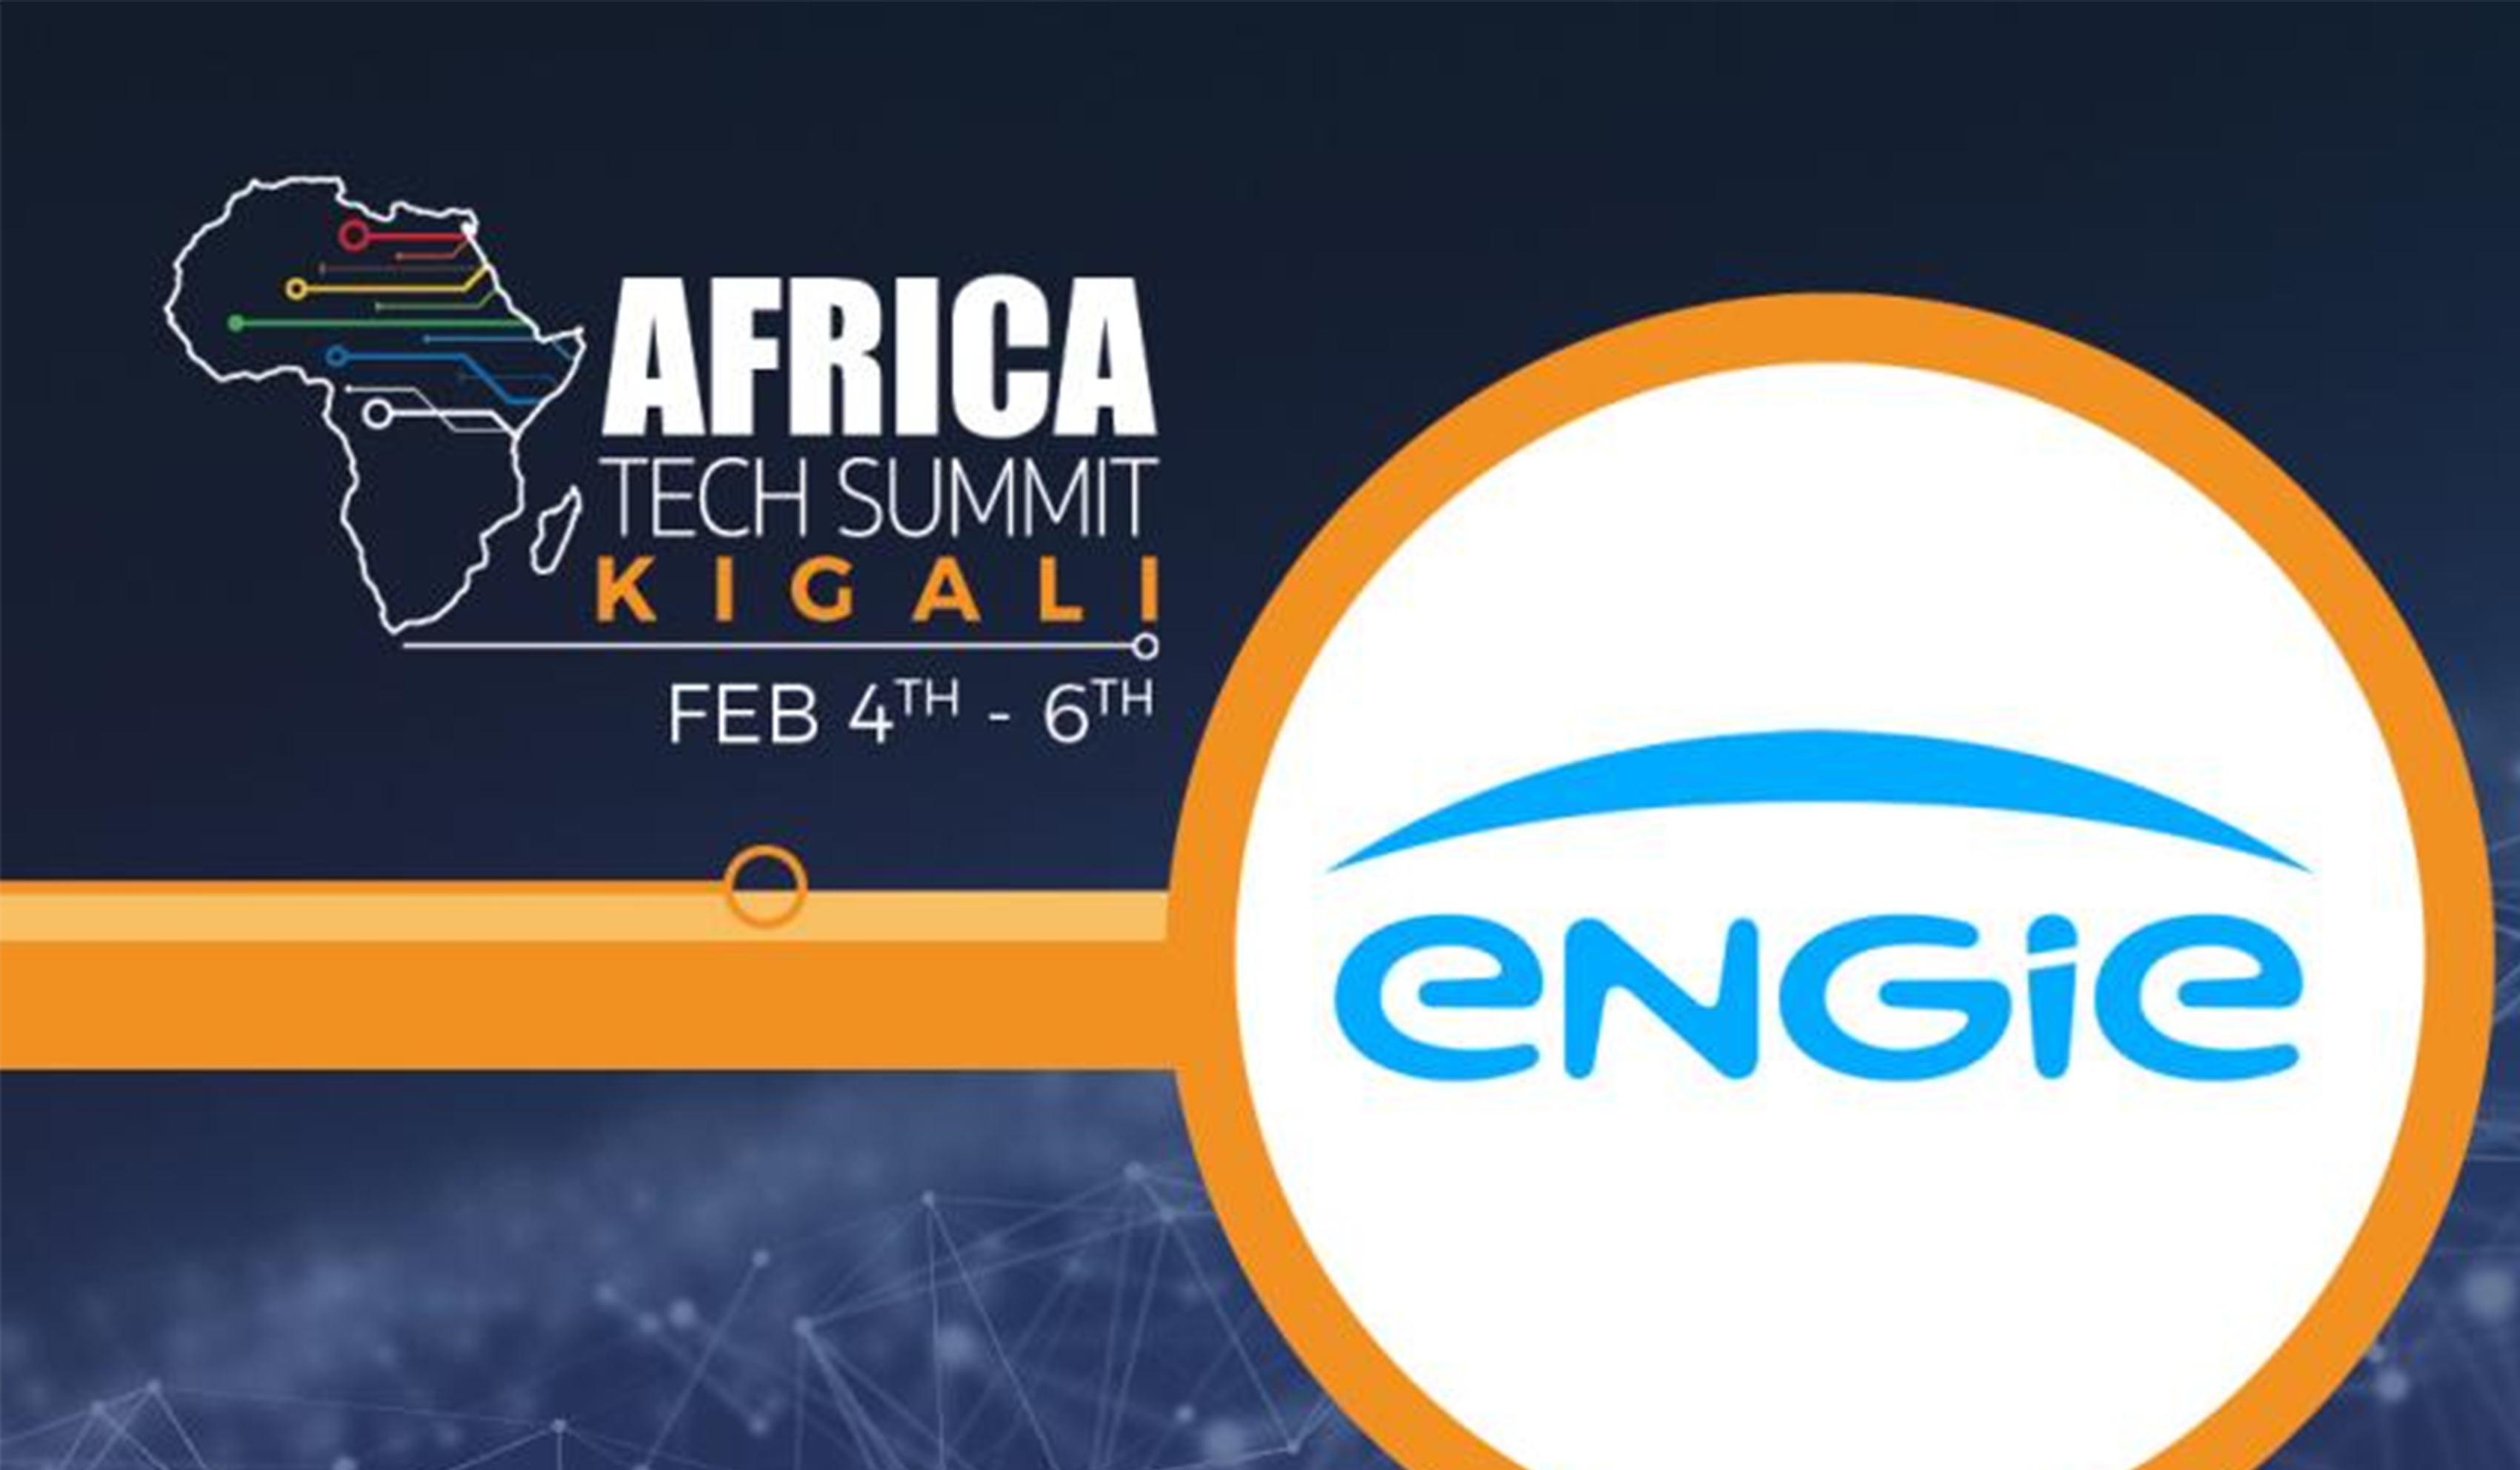 ENGIE at Africa Tech Summit - Kigali